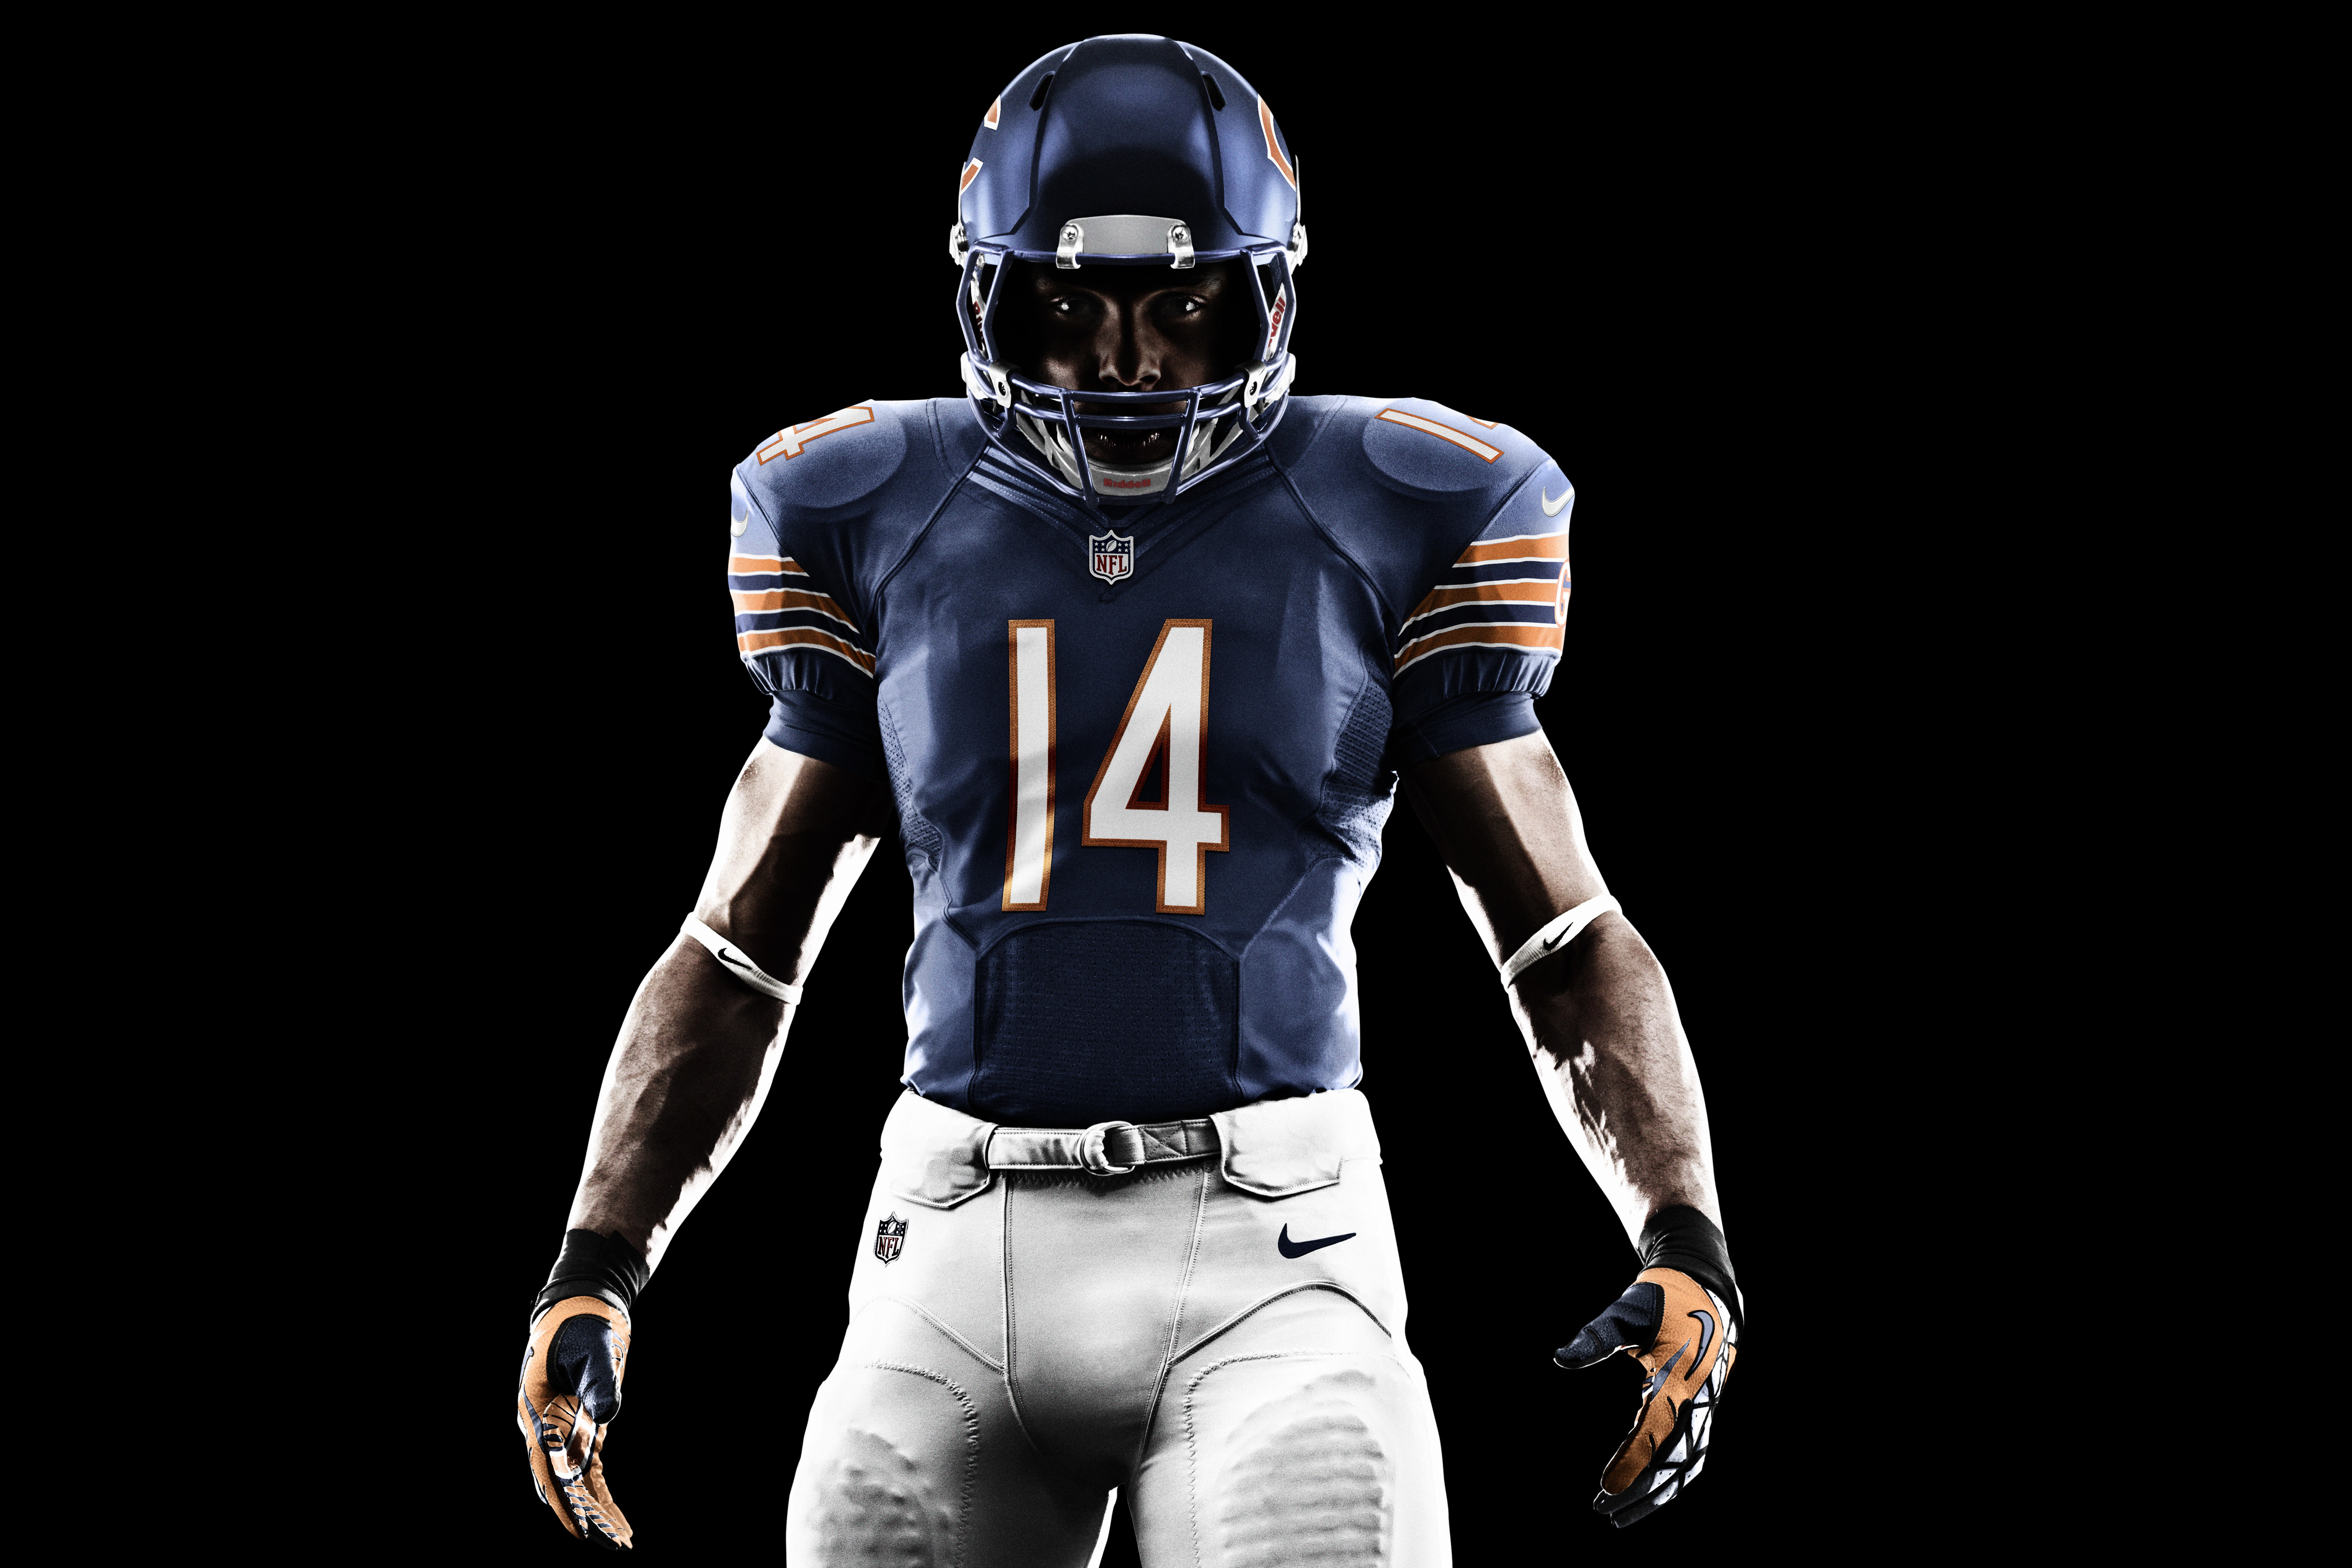 Nike Unveils New Chicago Bears Uniforms, Monsters of the Midway Look